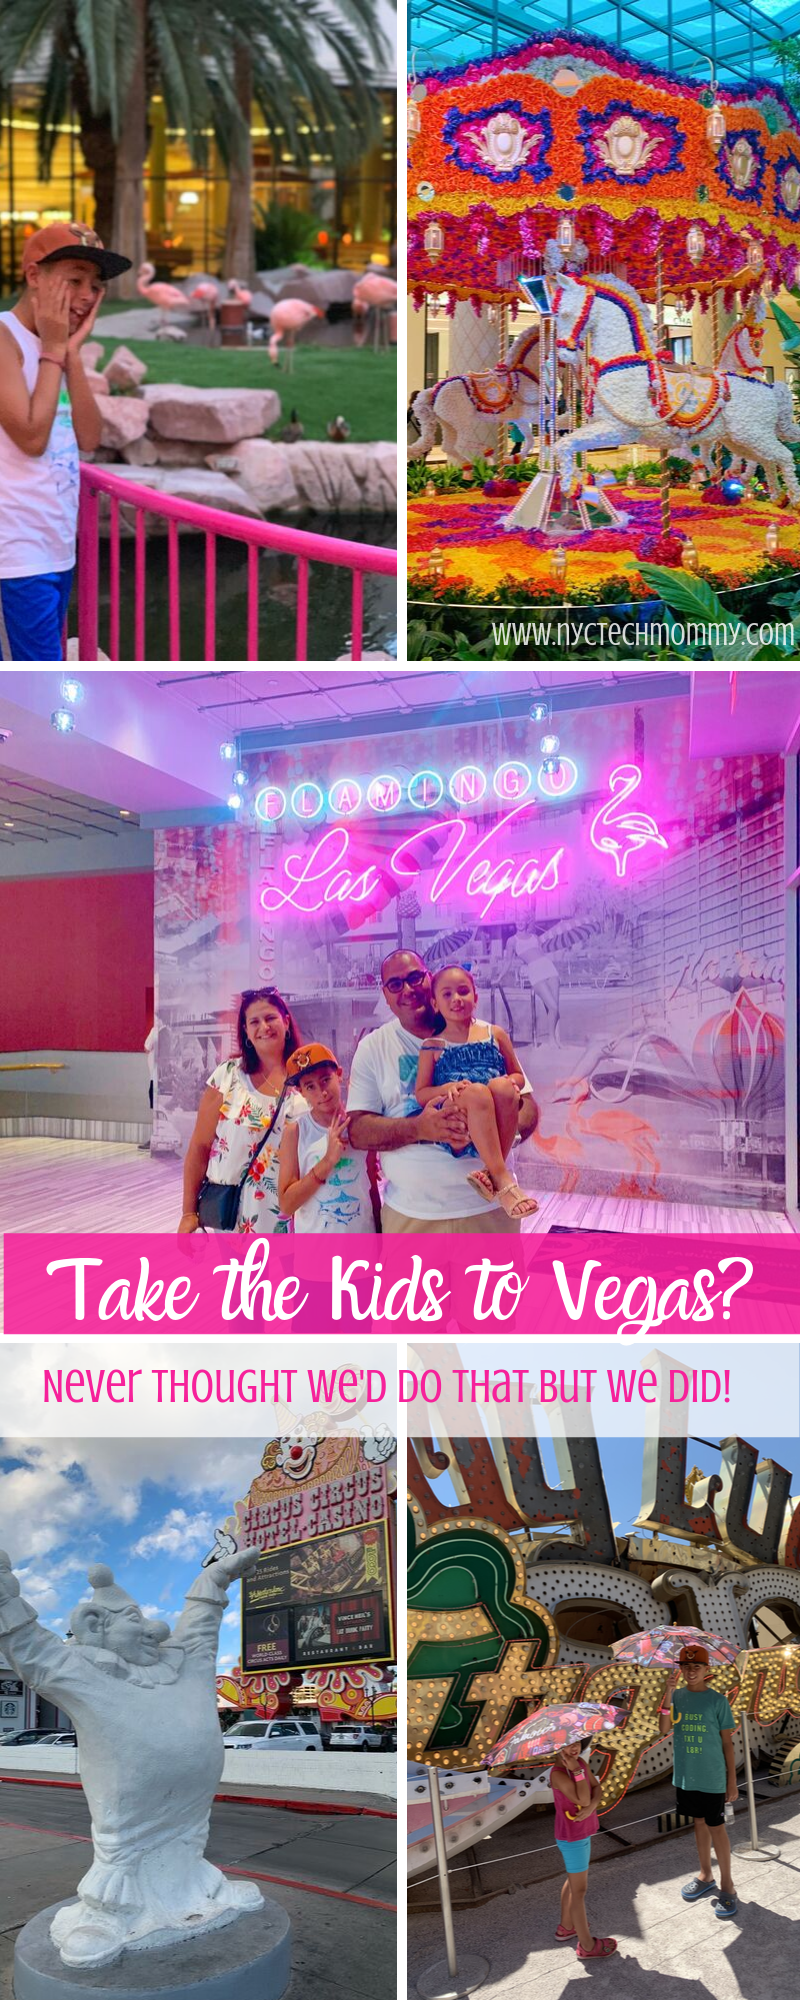 Never thought we'd take the kids to Las Vegas but we did! Check out our tips for a great family trip.

#LasVegasWithKids #LasVegasThingsToDo #VacationIdeas #FamilyTravel